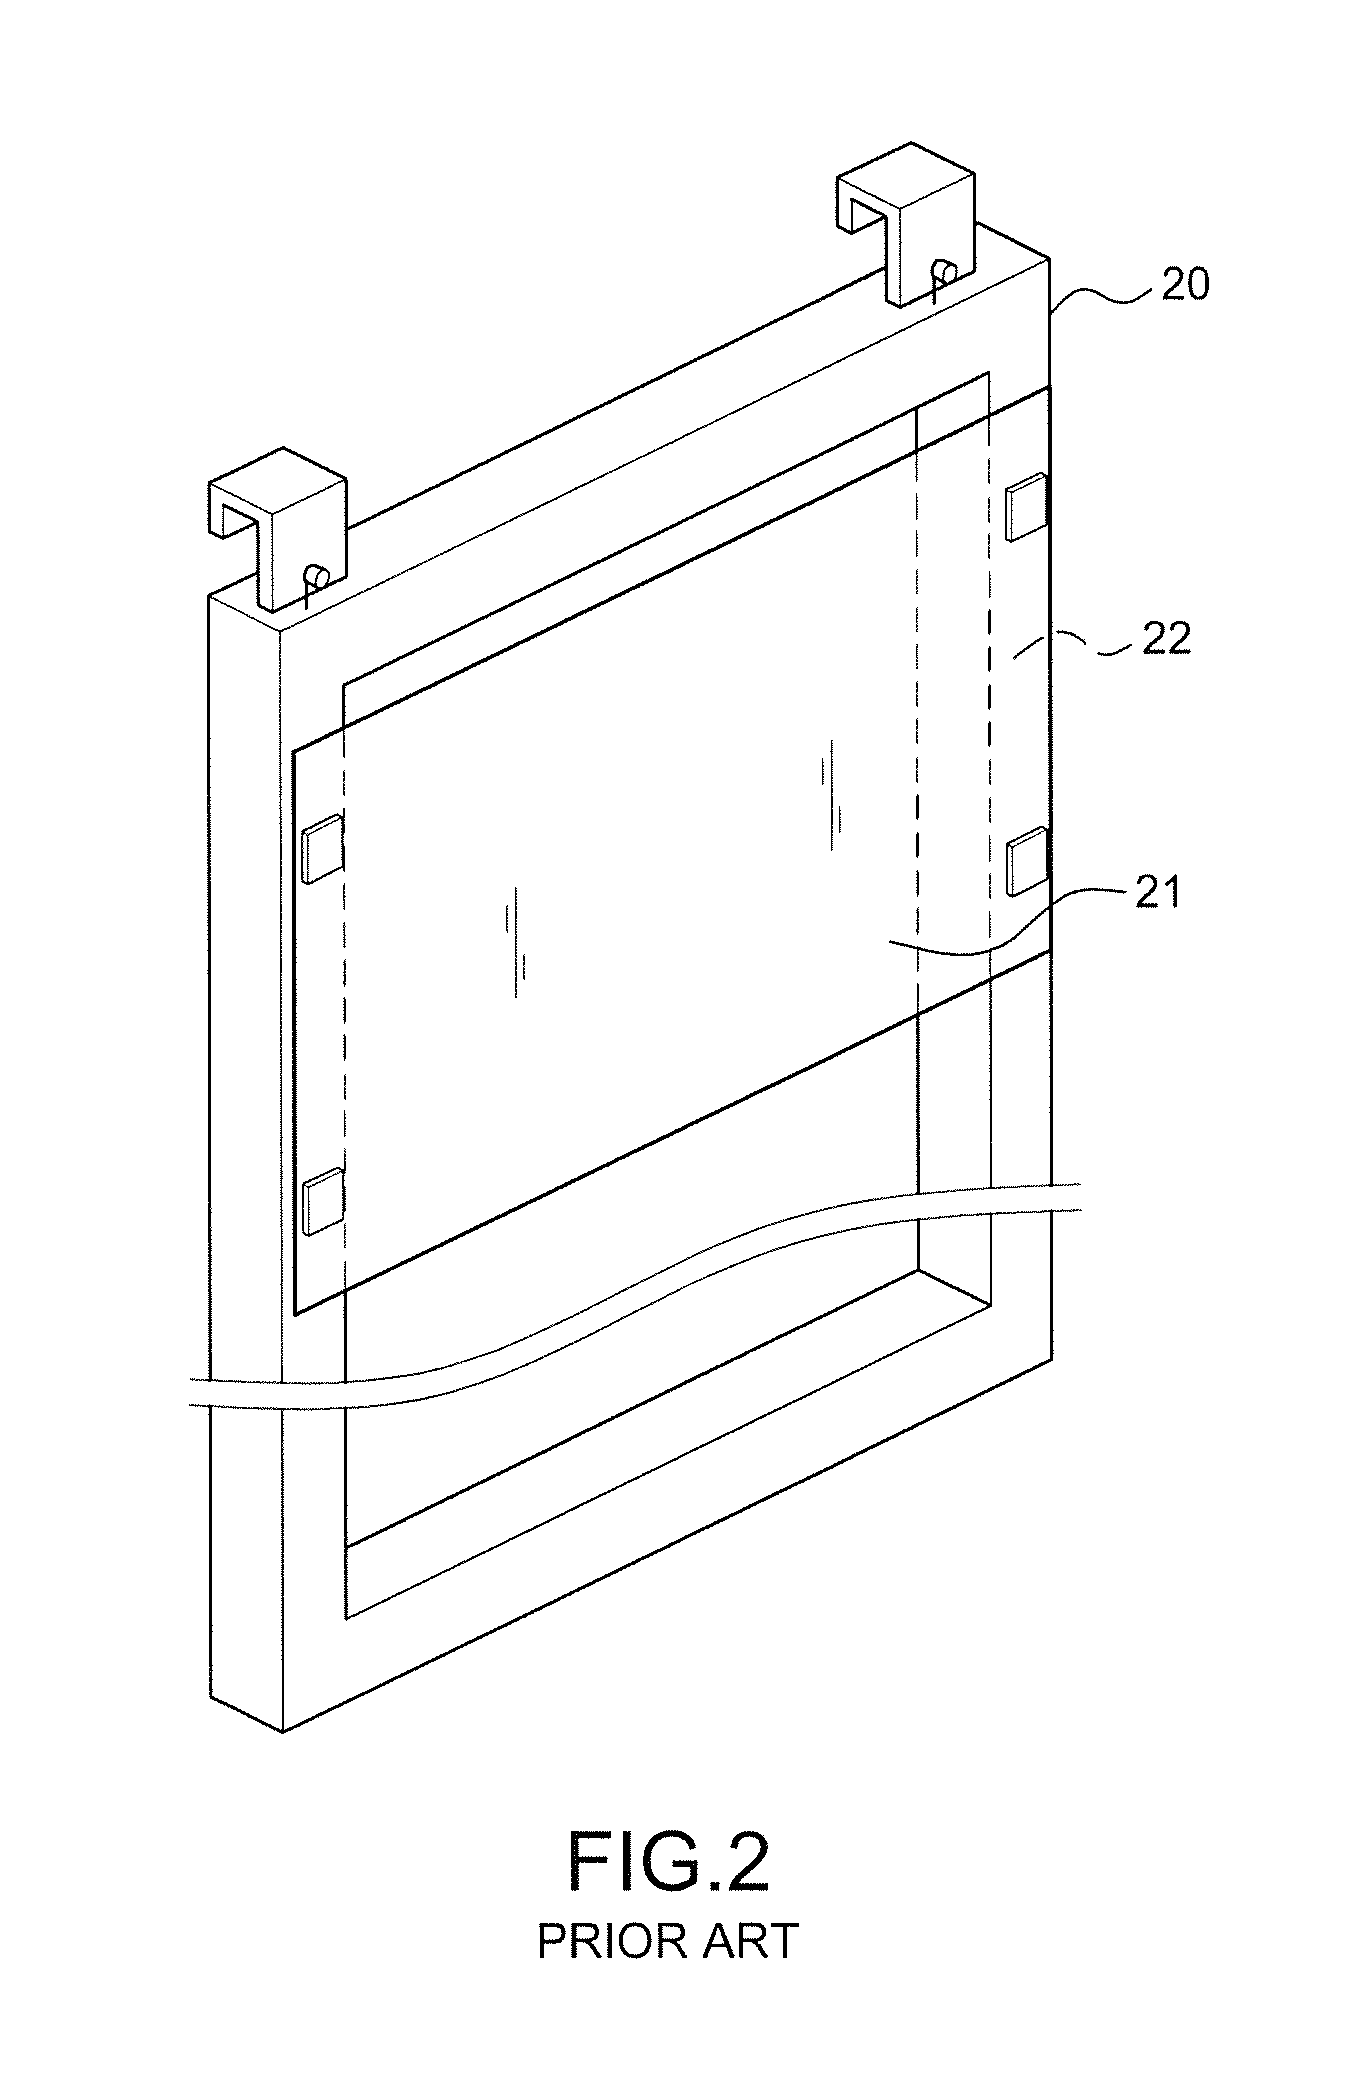 Method of thin printed circuit board wet process consistency on the same carrier